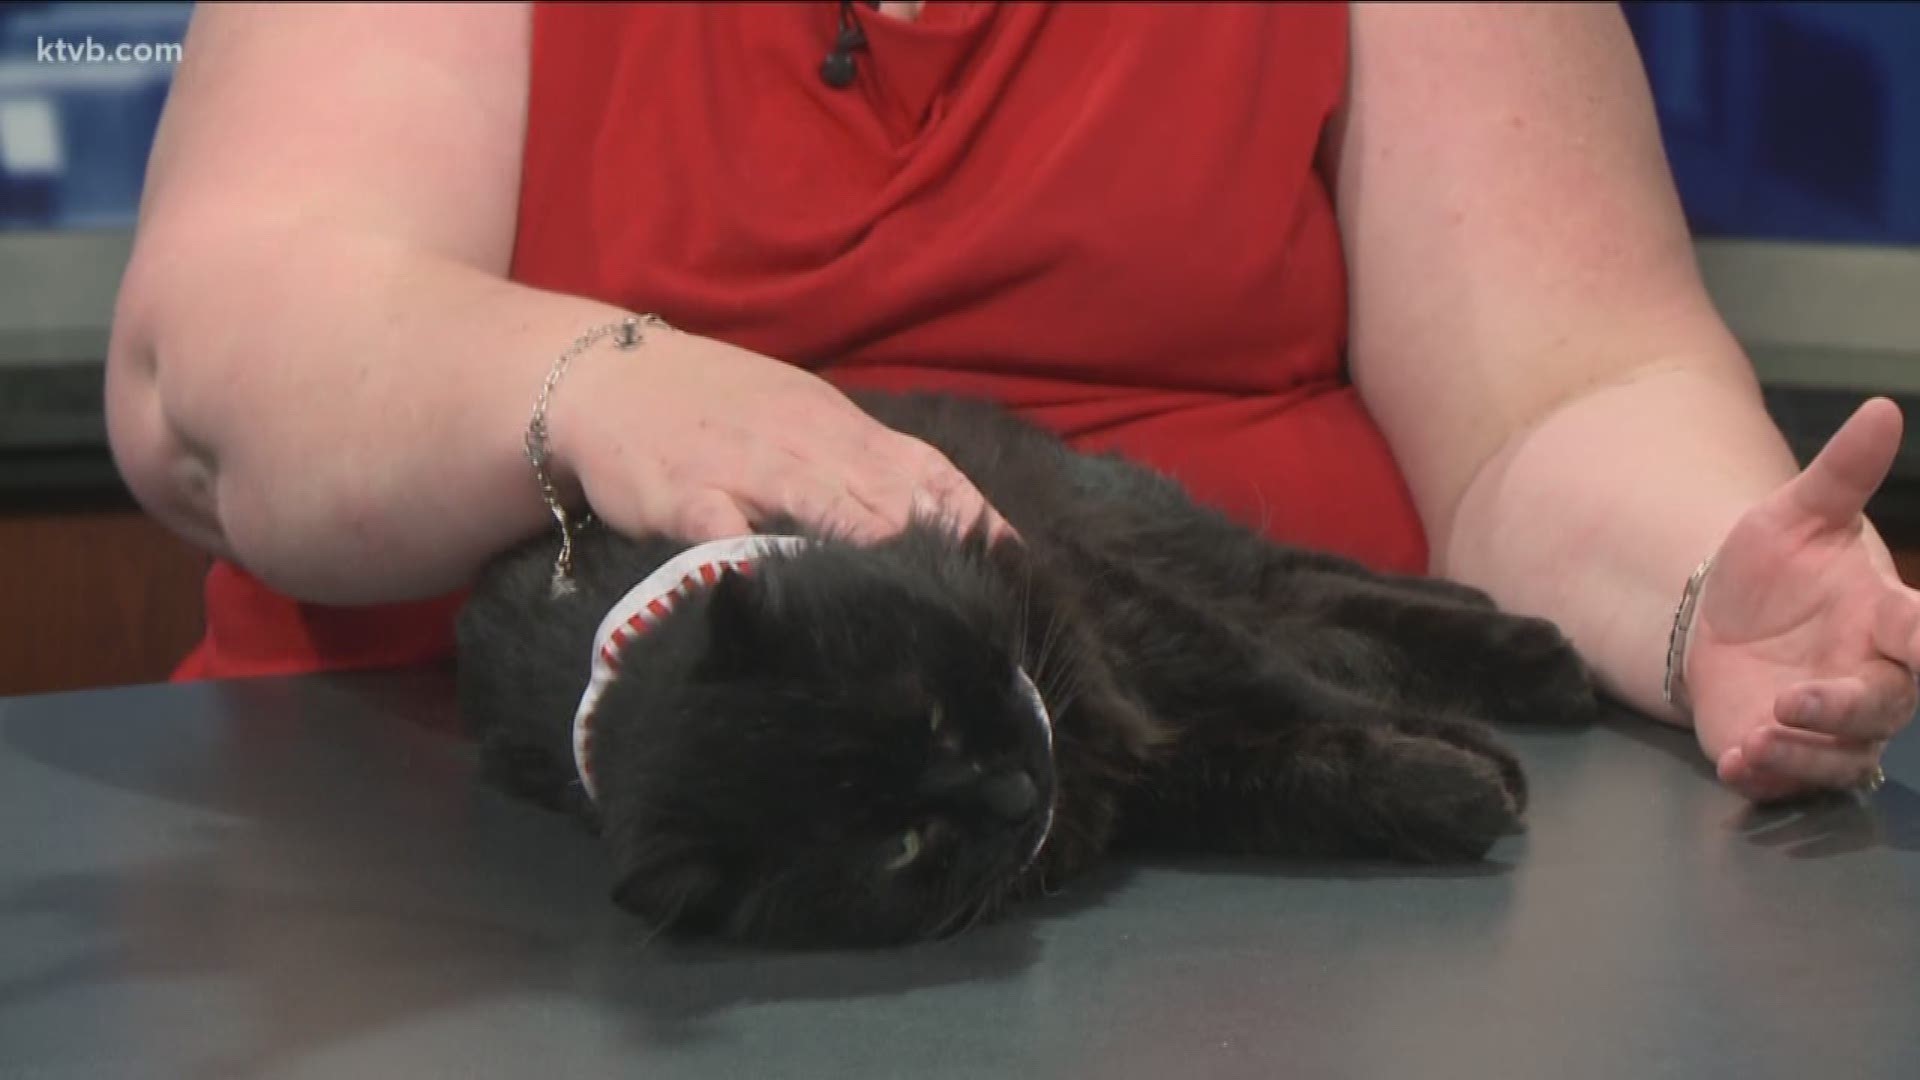 This black cat is ready for adoption now. It costs just $10 to take him home.